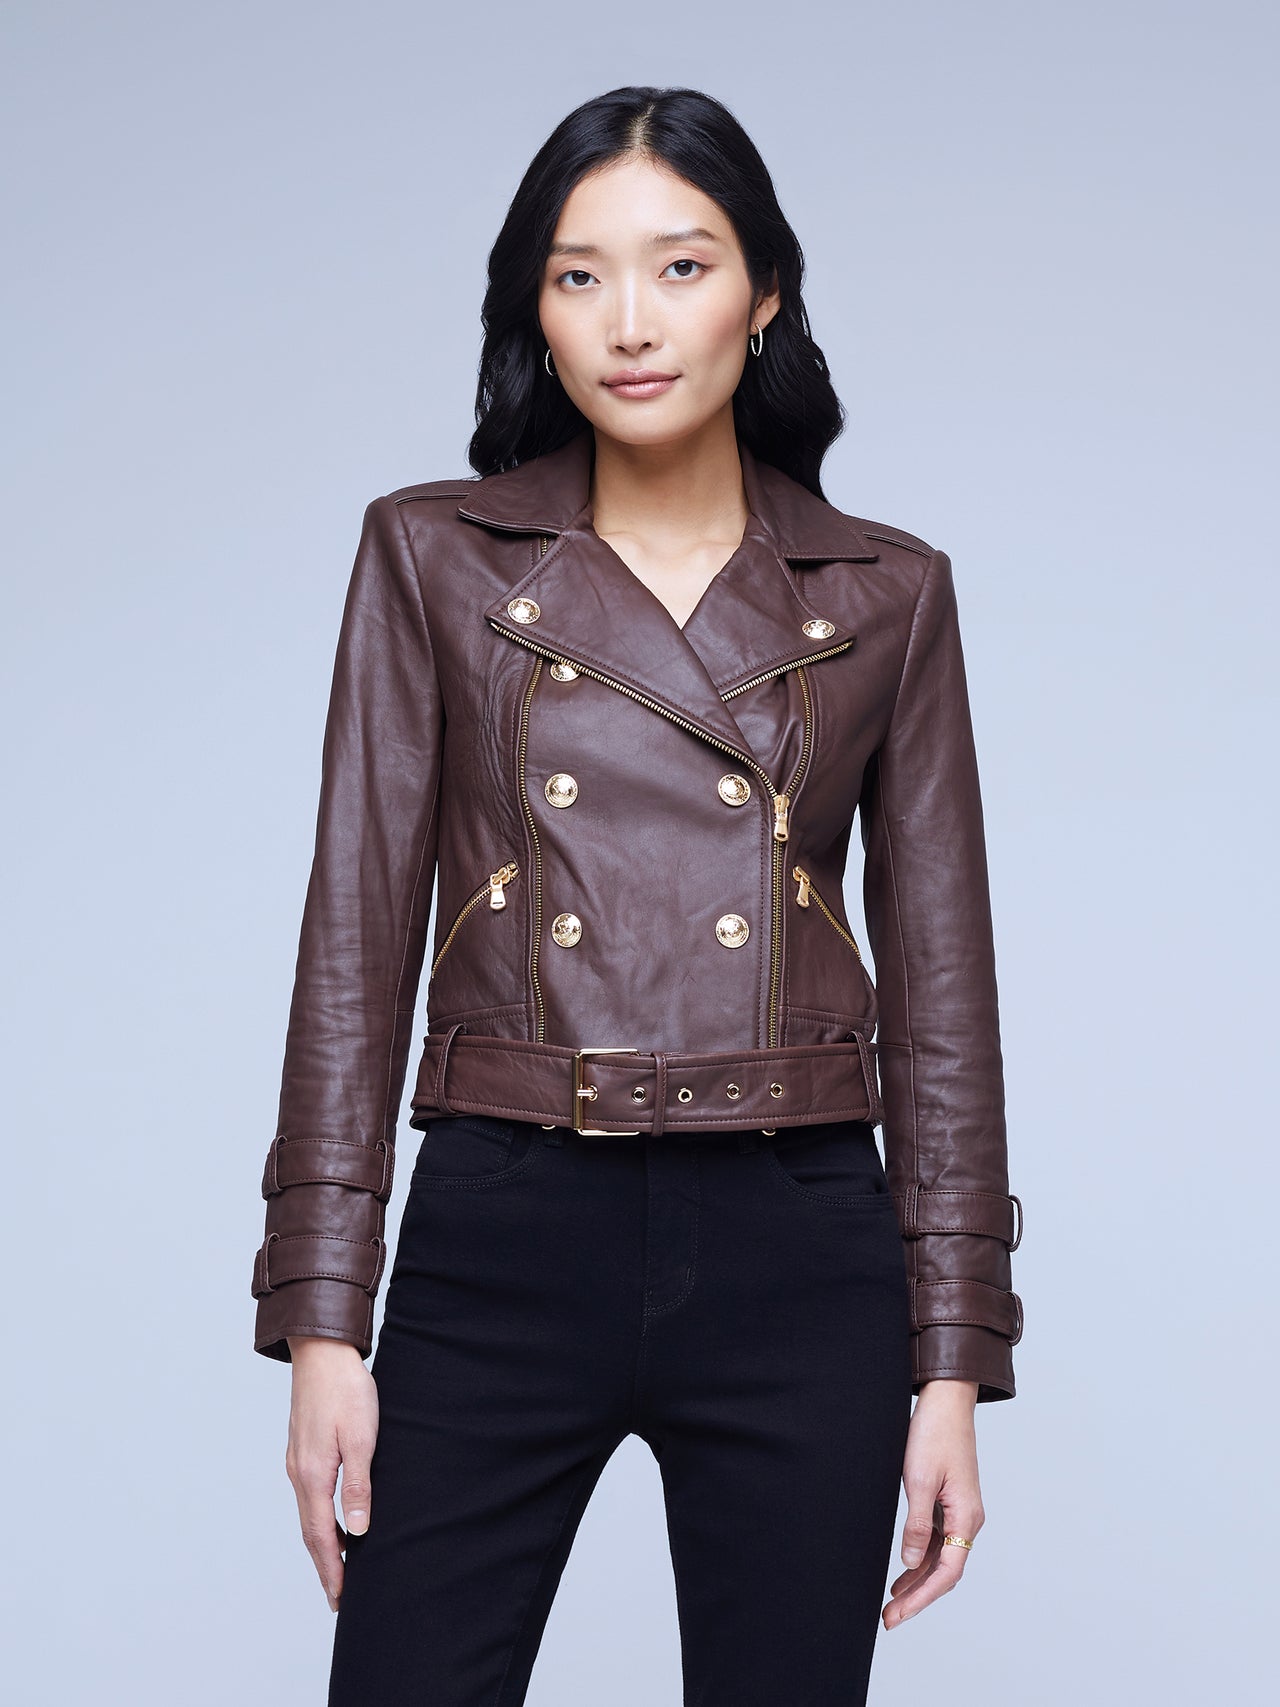 L'AGENCE - Women's Blazers, Jackets & Outerwear | Official Site